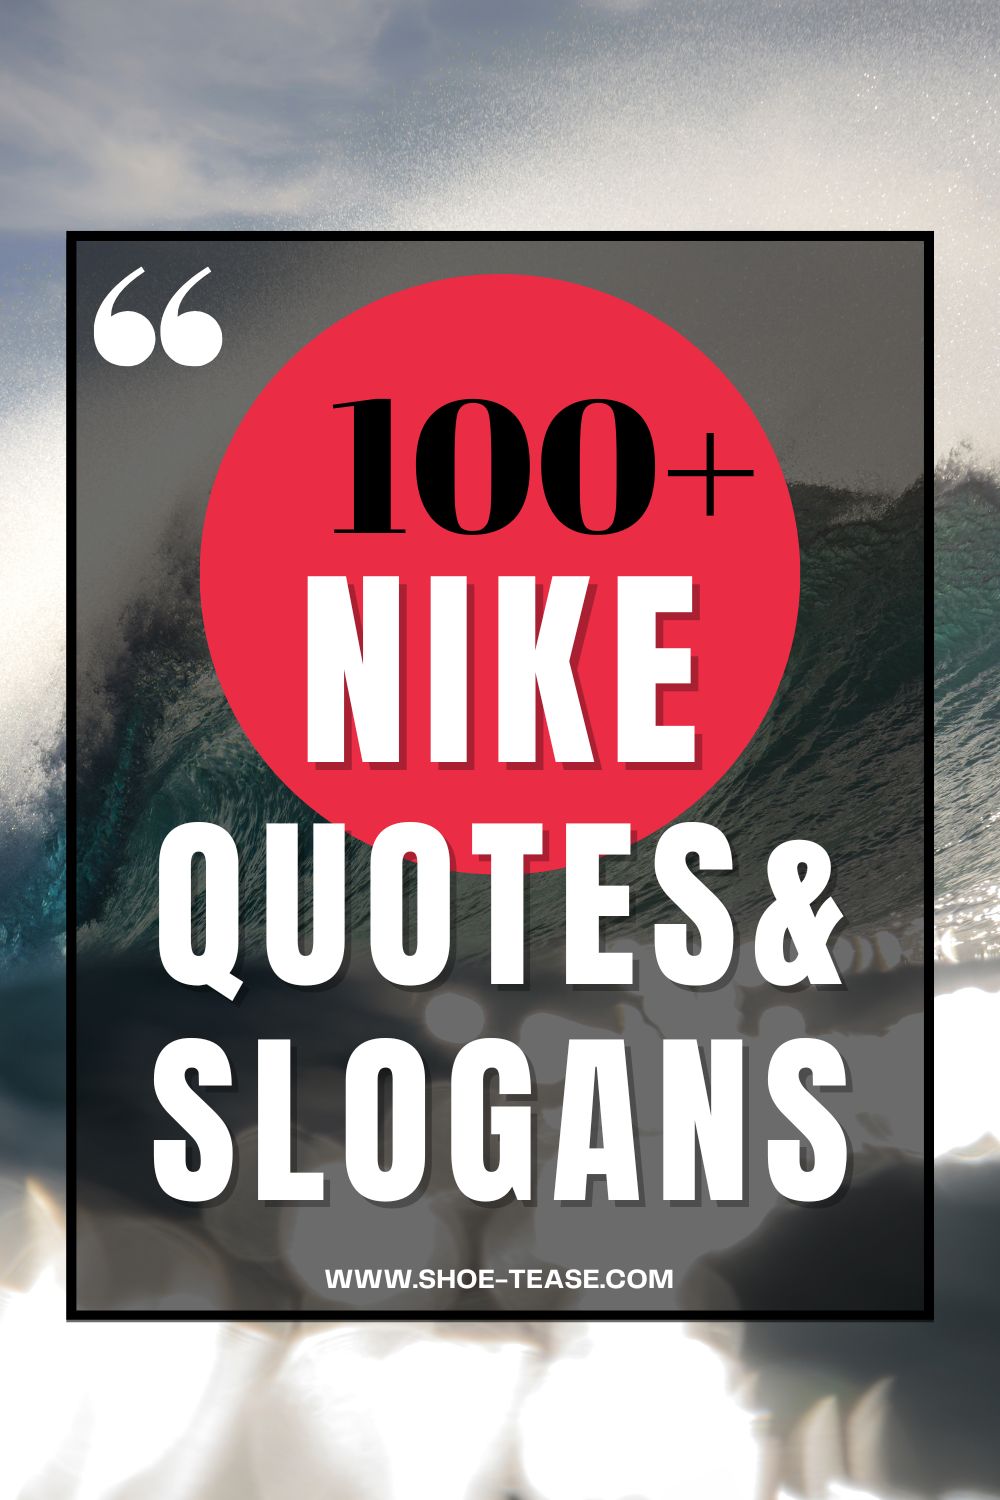 Over 100 Best Nike Quotes, Motivational Slogans and about Nike